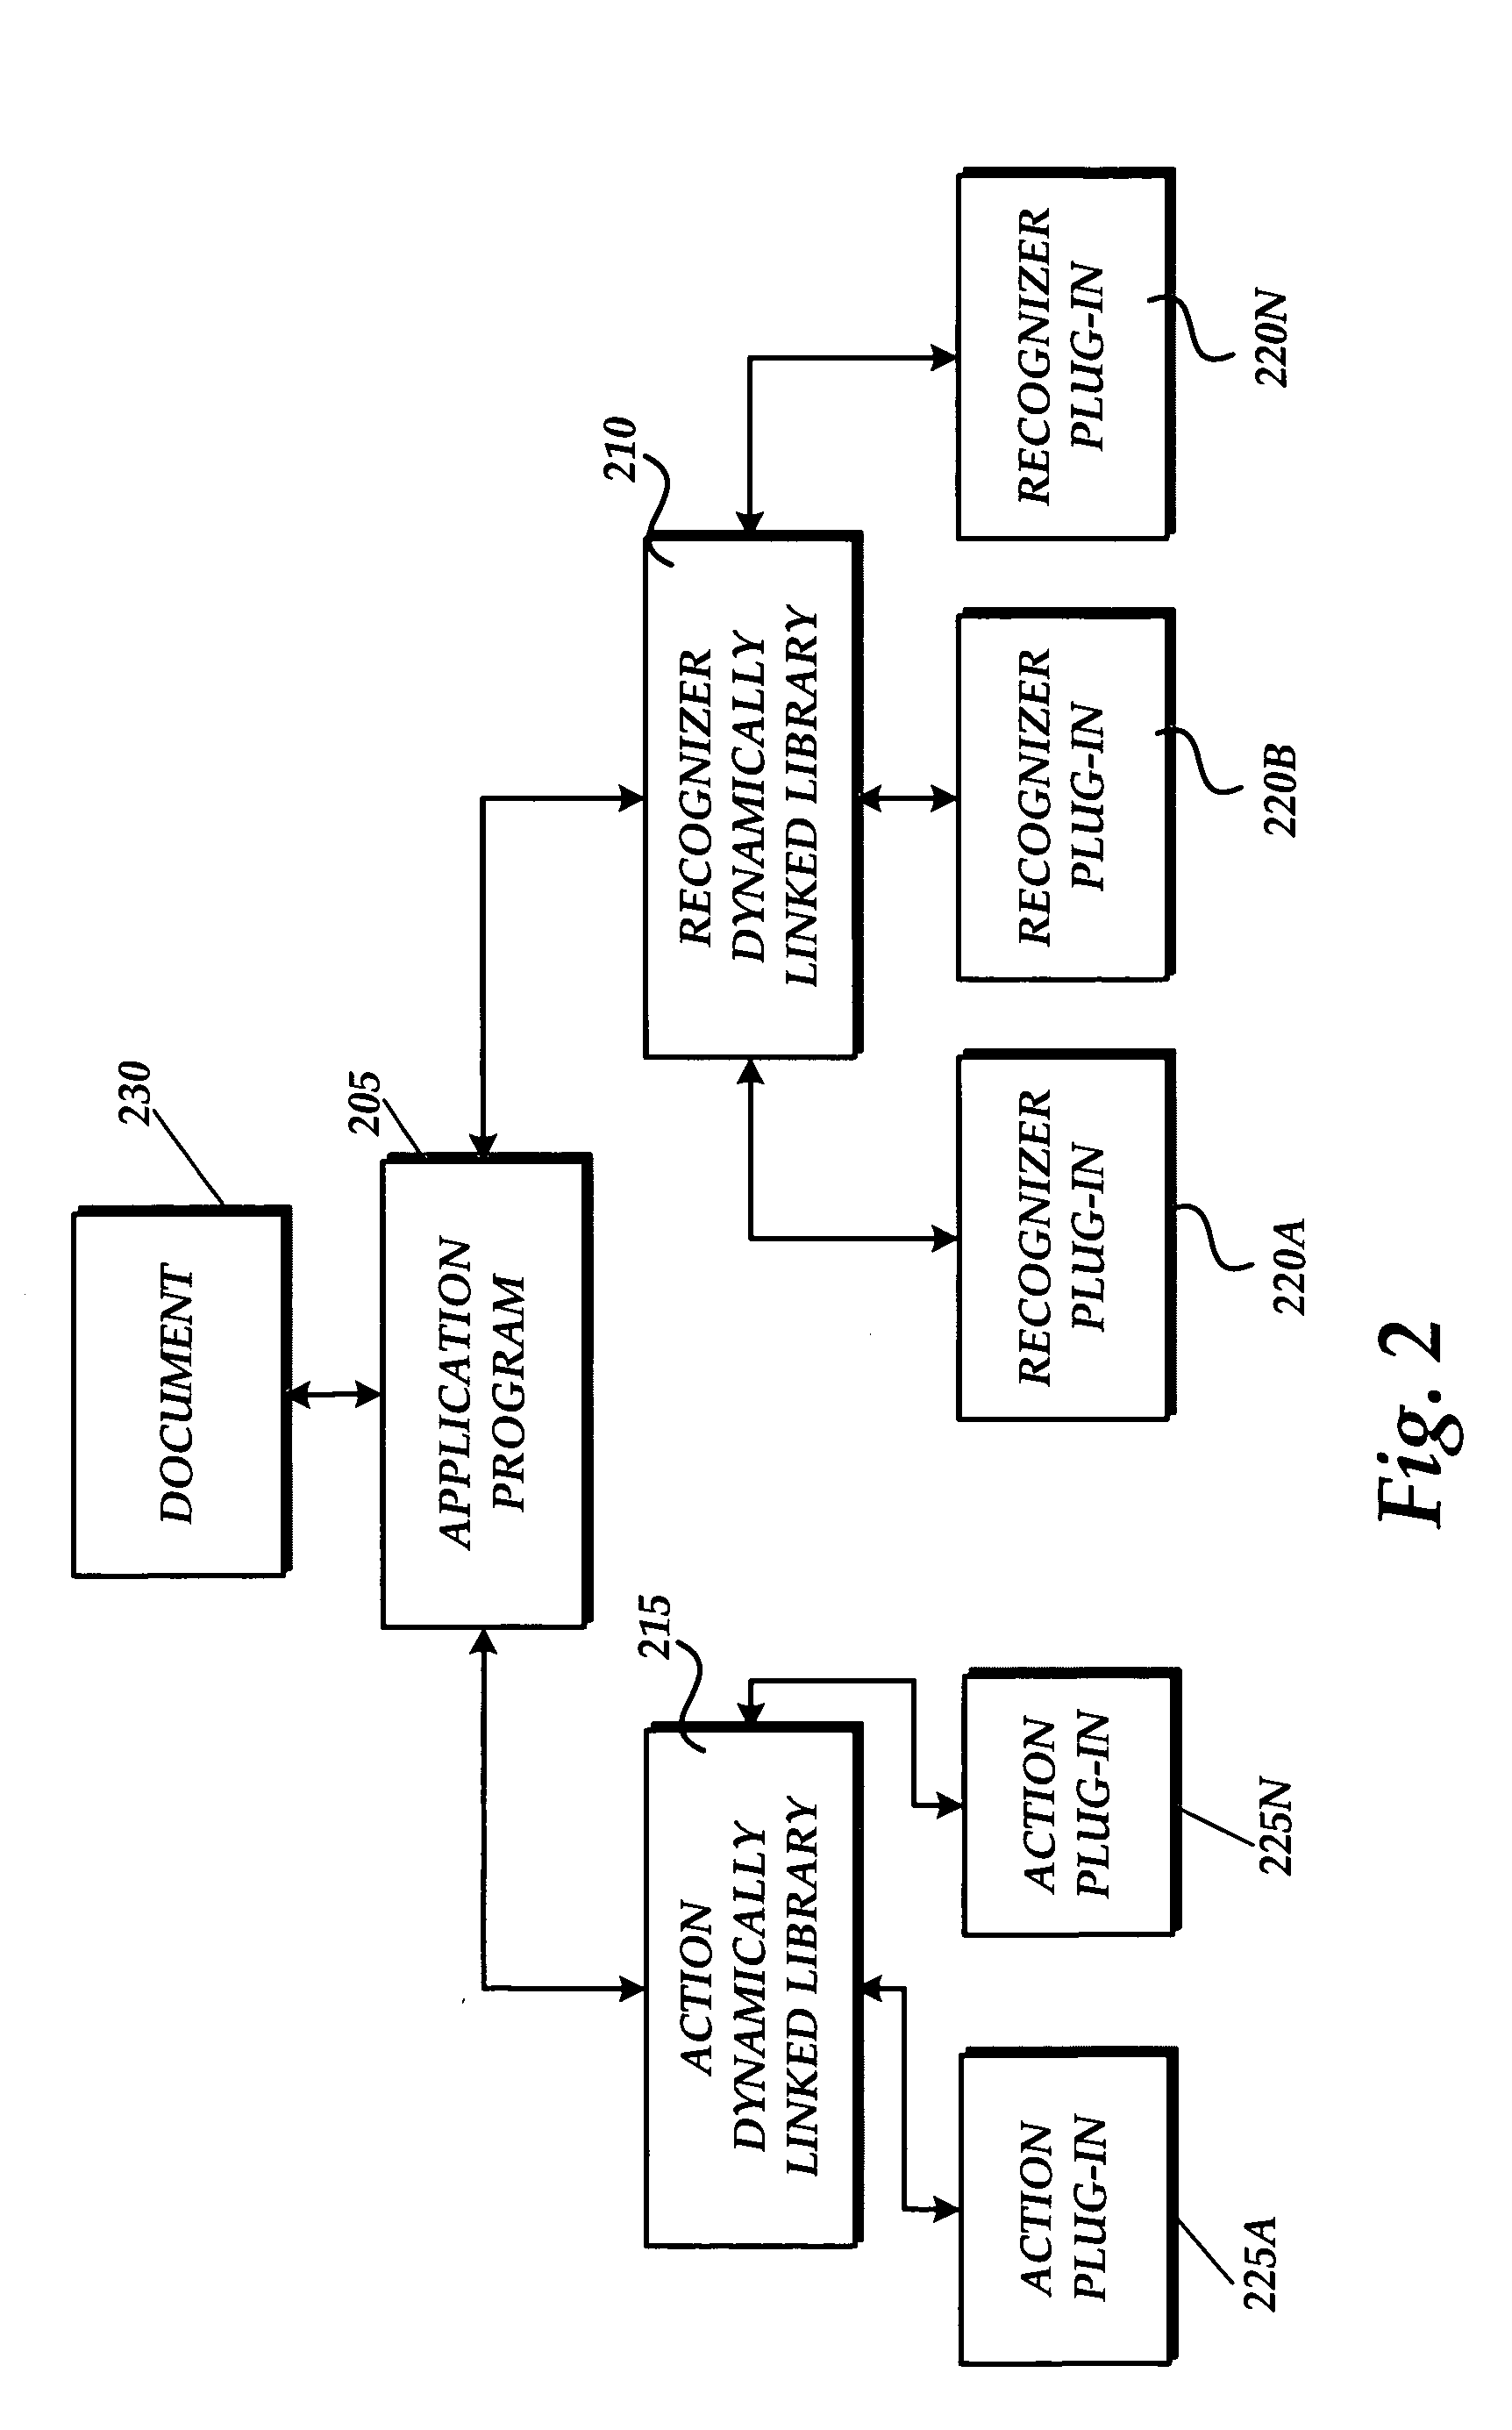 Methods and systems for providing automated actions on recognized text strings in a computer-generated document